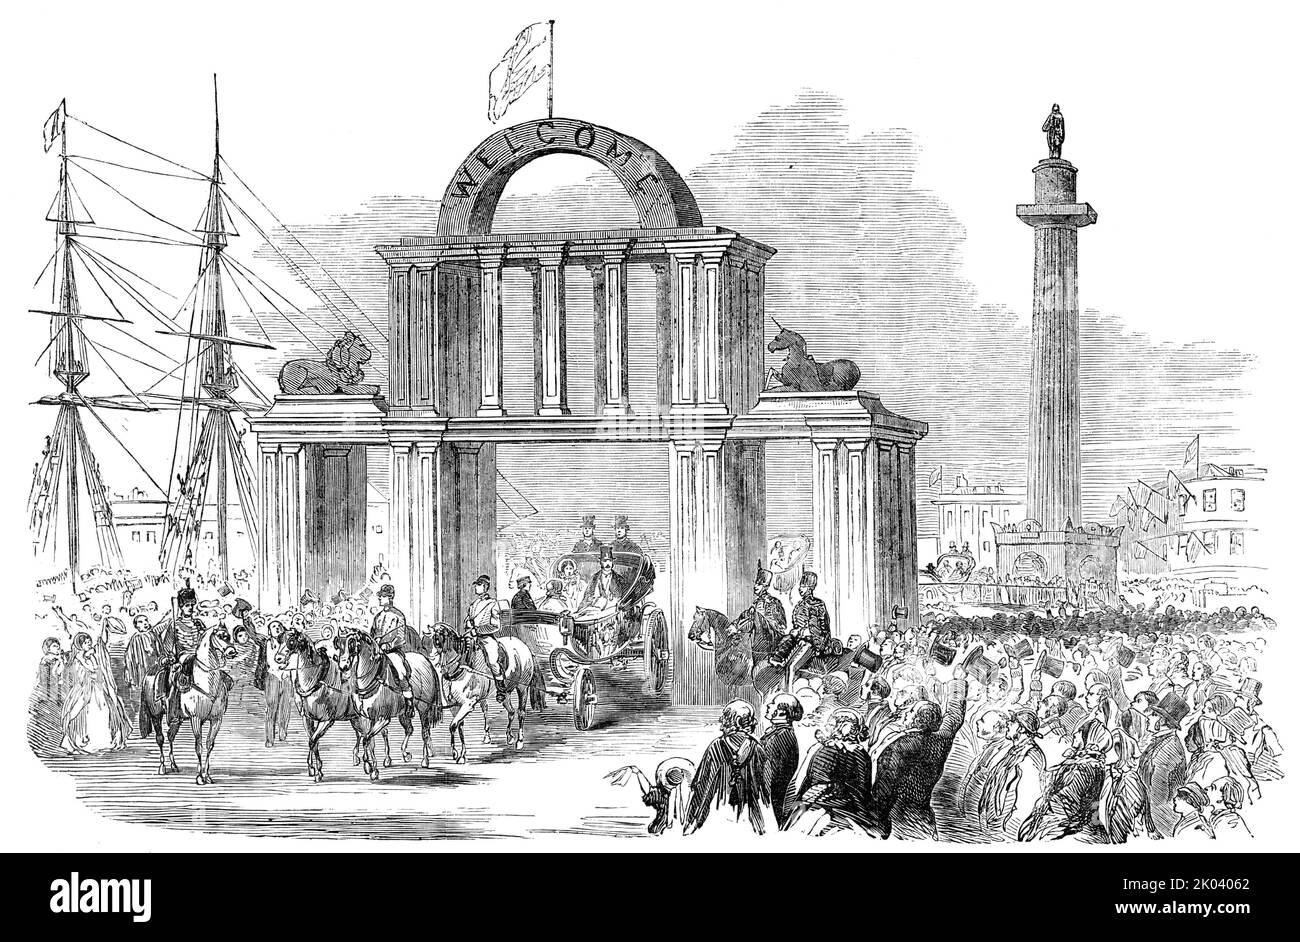 Arch in Whitefriars at the Wilberforce Column, Hull, 1854. Queen Victoria visits Yorkshire. '...dense crowds...assembled in front of the hotel...and thronged the principal thoroughfares of the town, which soon became almost impassable...The inhabitants testified their loyal devotion by an illumination so general, that, along whole lines of streets, scarcely a house could be seen which had not a device of some kind or other. The chief display was in the Market-place and in Whitefriargate, where triumphal arches blazed with light, and the Wilberforce monument and the gilded statue of King Willia Stock Photo